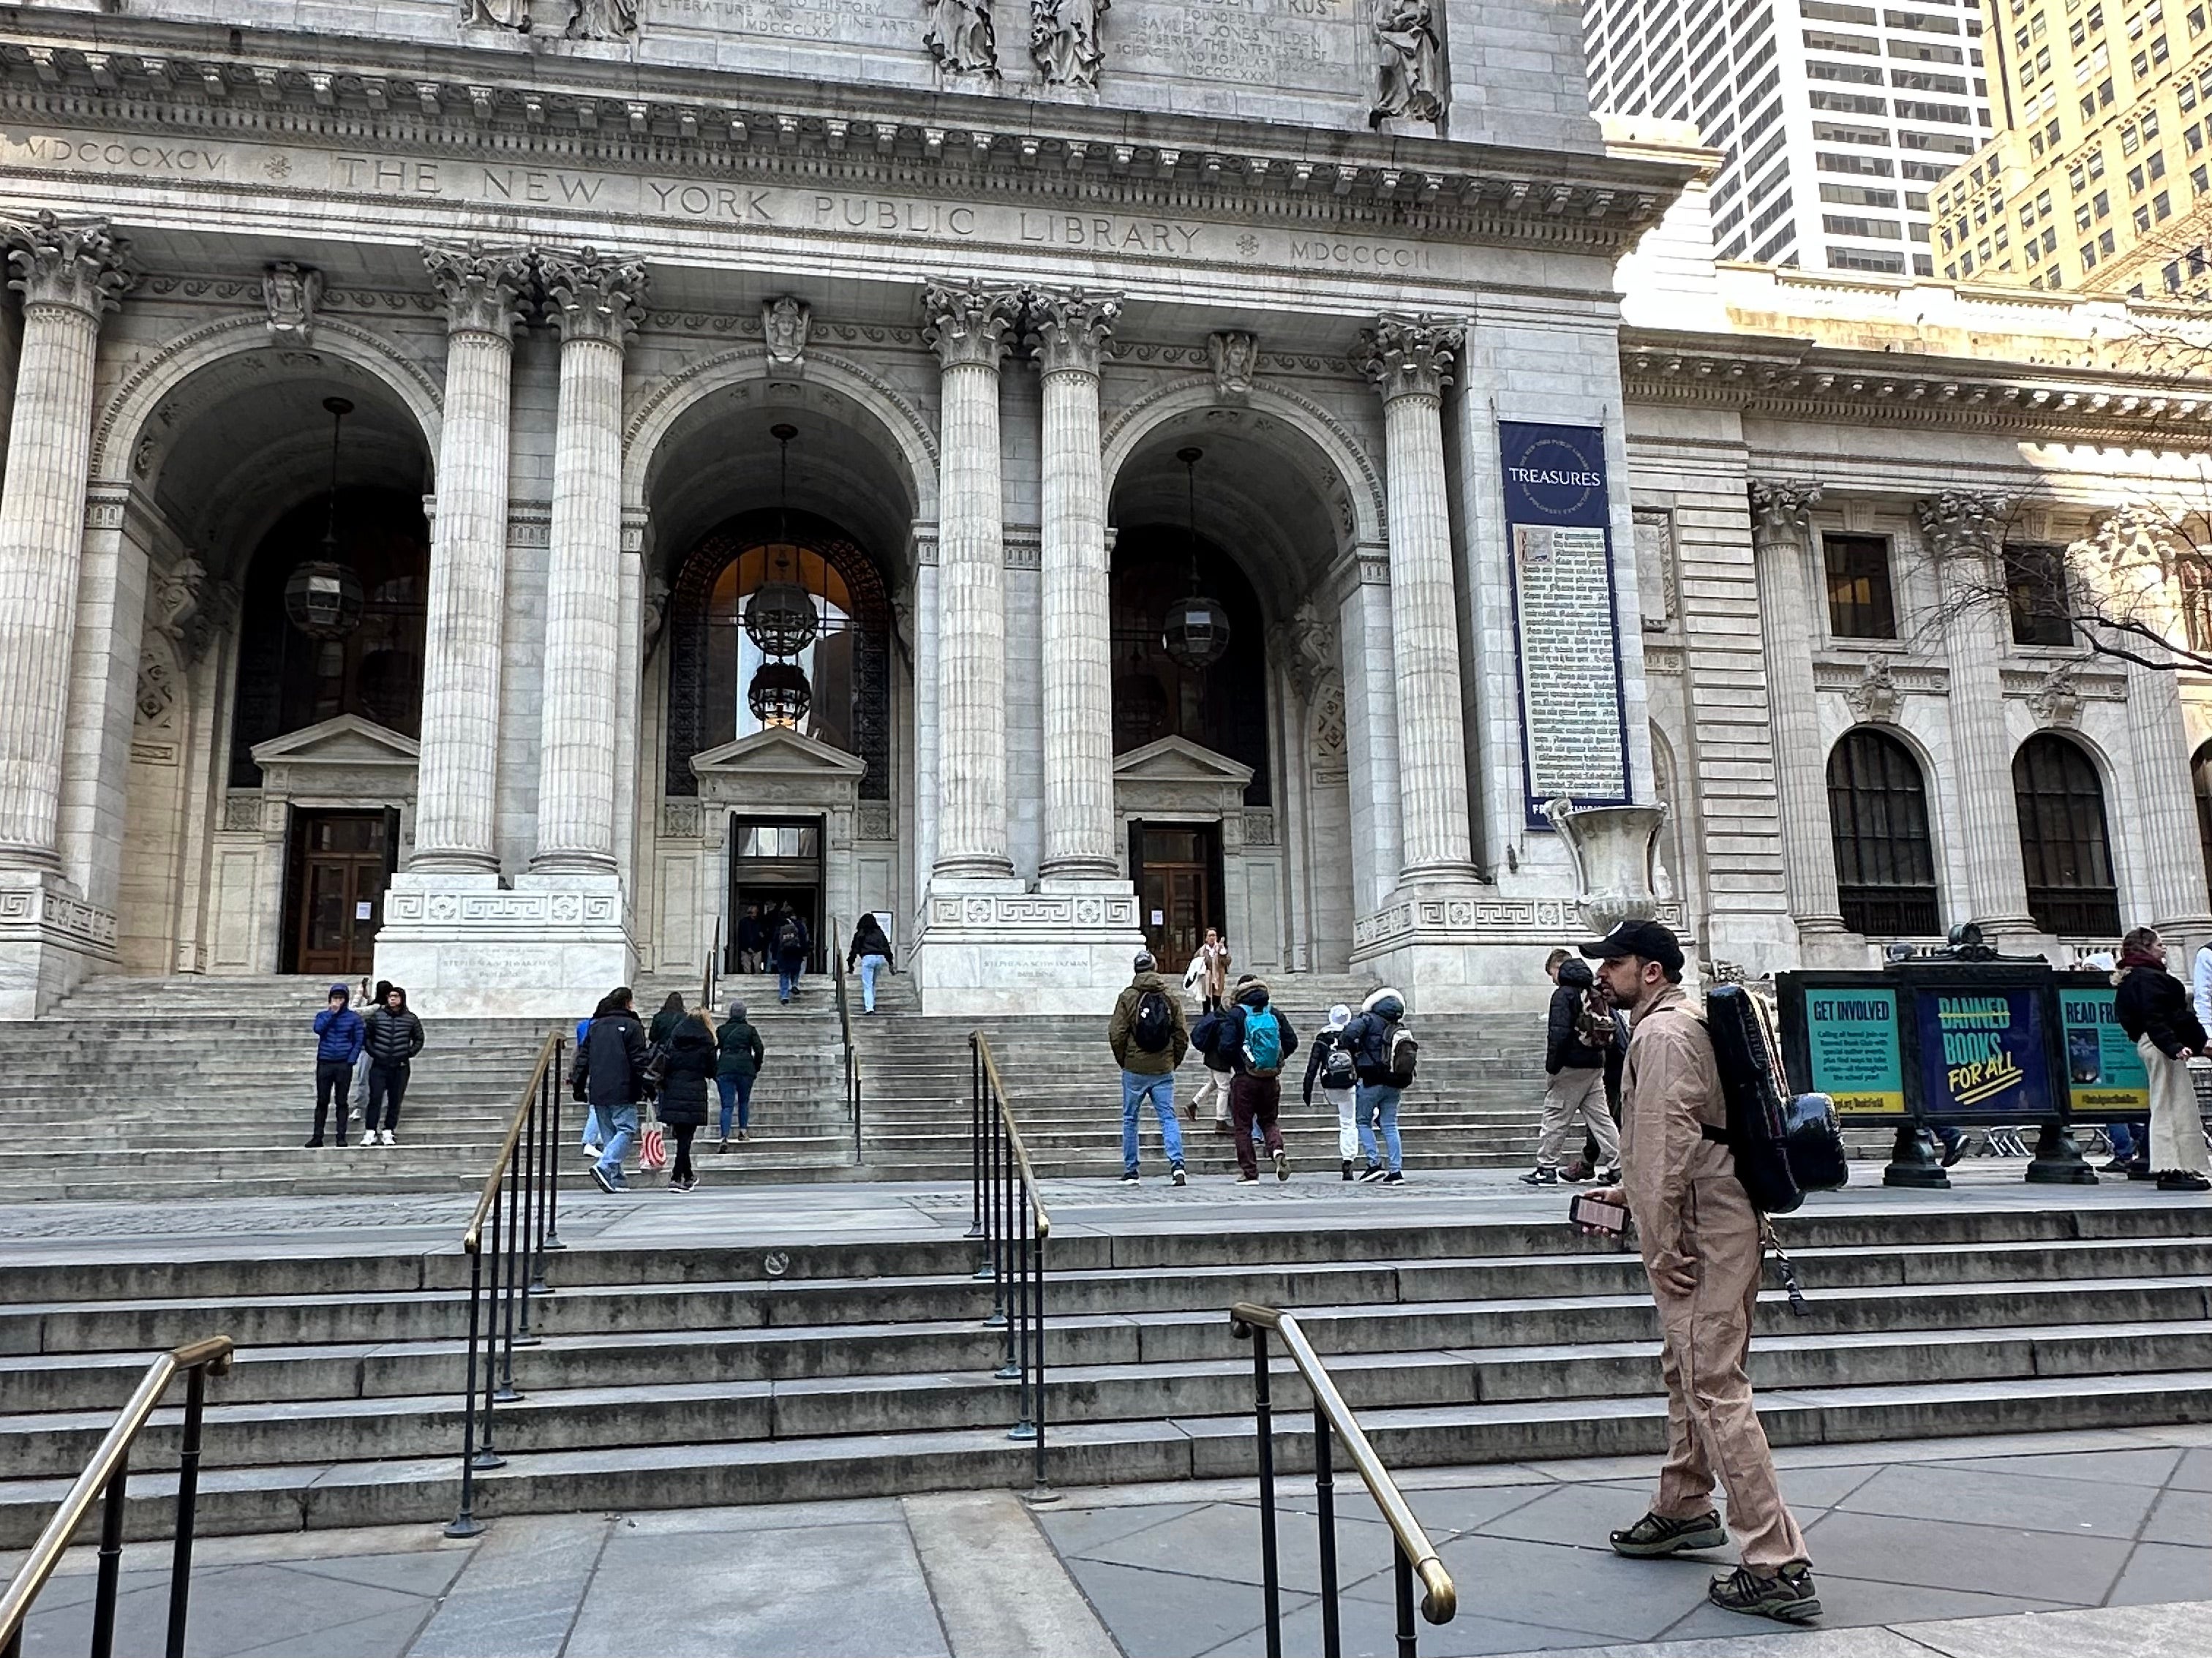 The New York Public Library is where the Ghostbusters were born